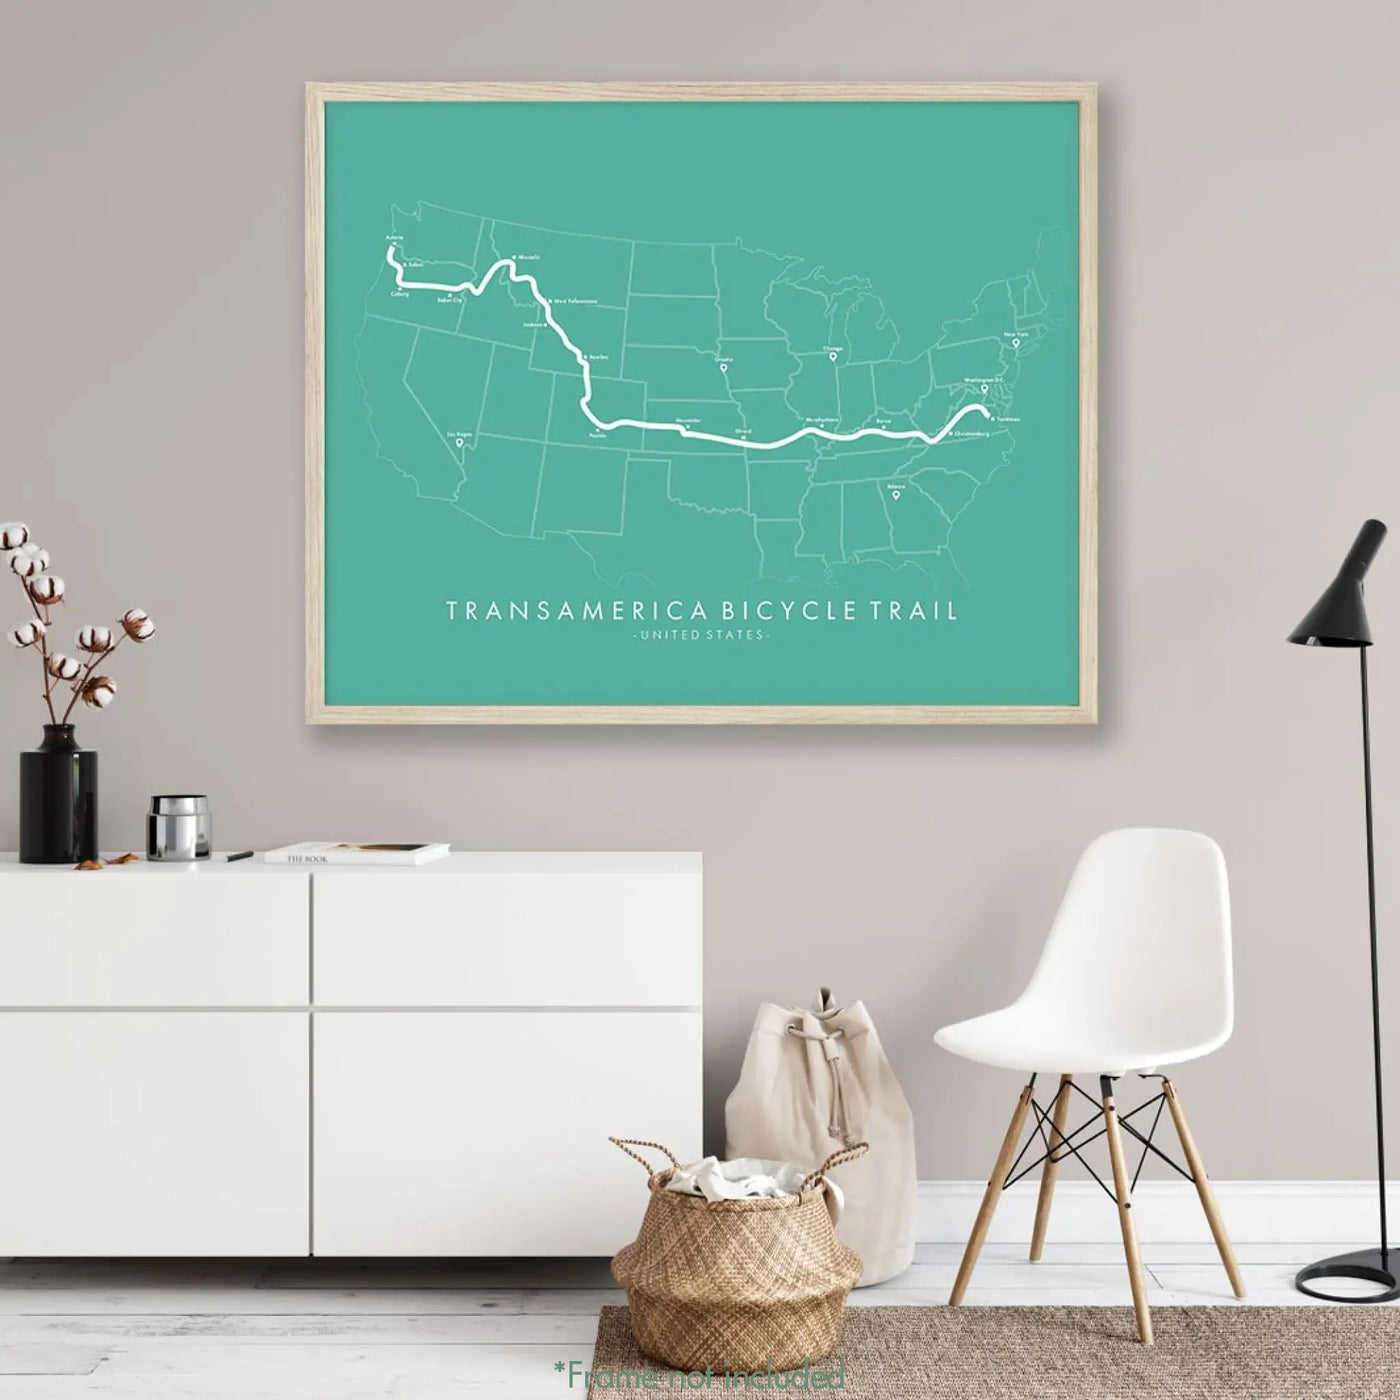 Trail Poster of Transamerica Bicycle Trail - Teal Mockup